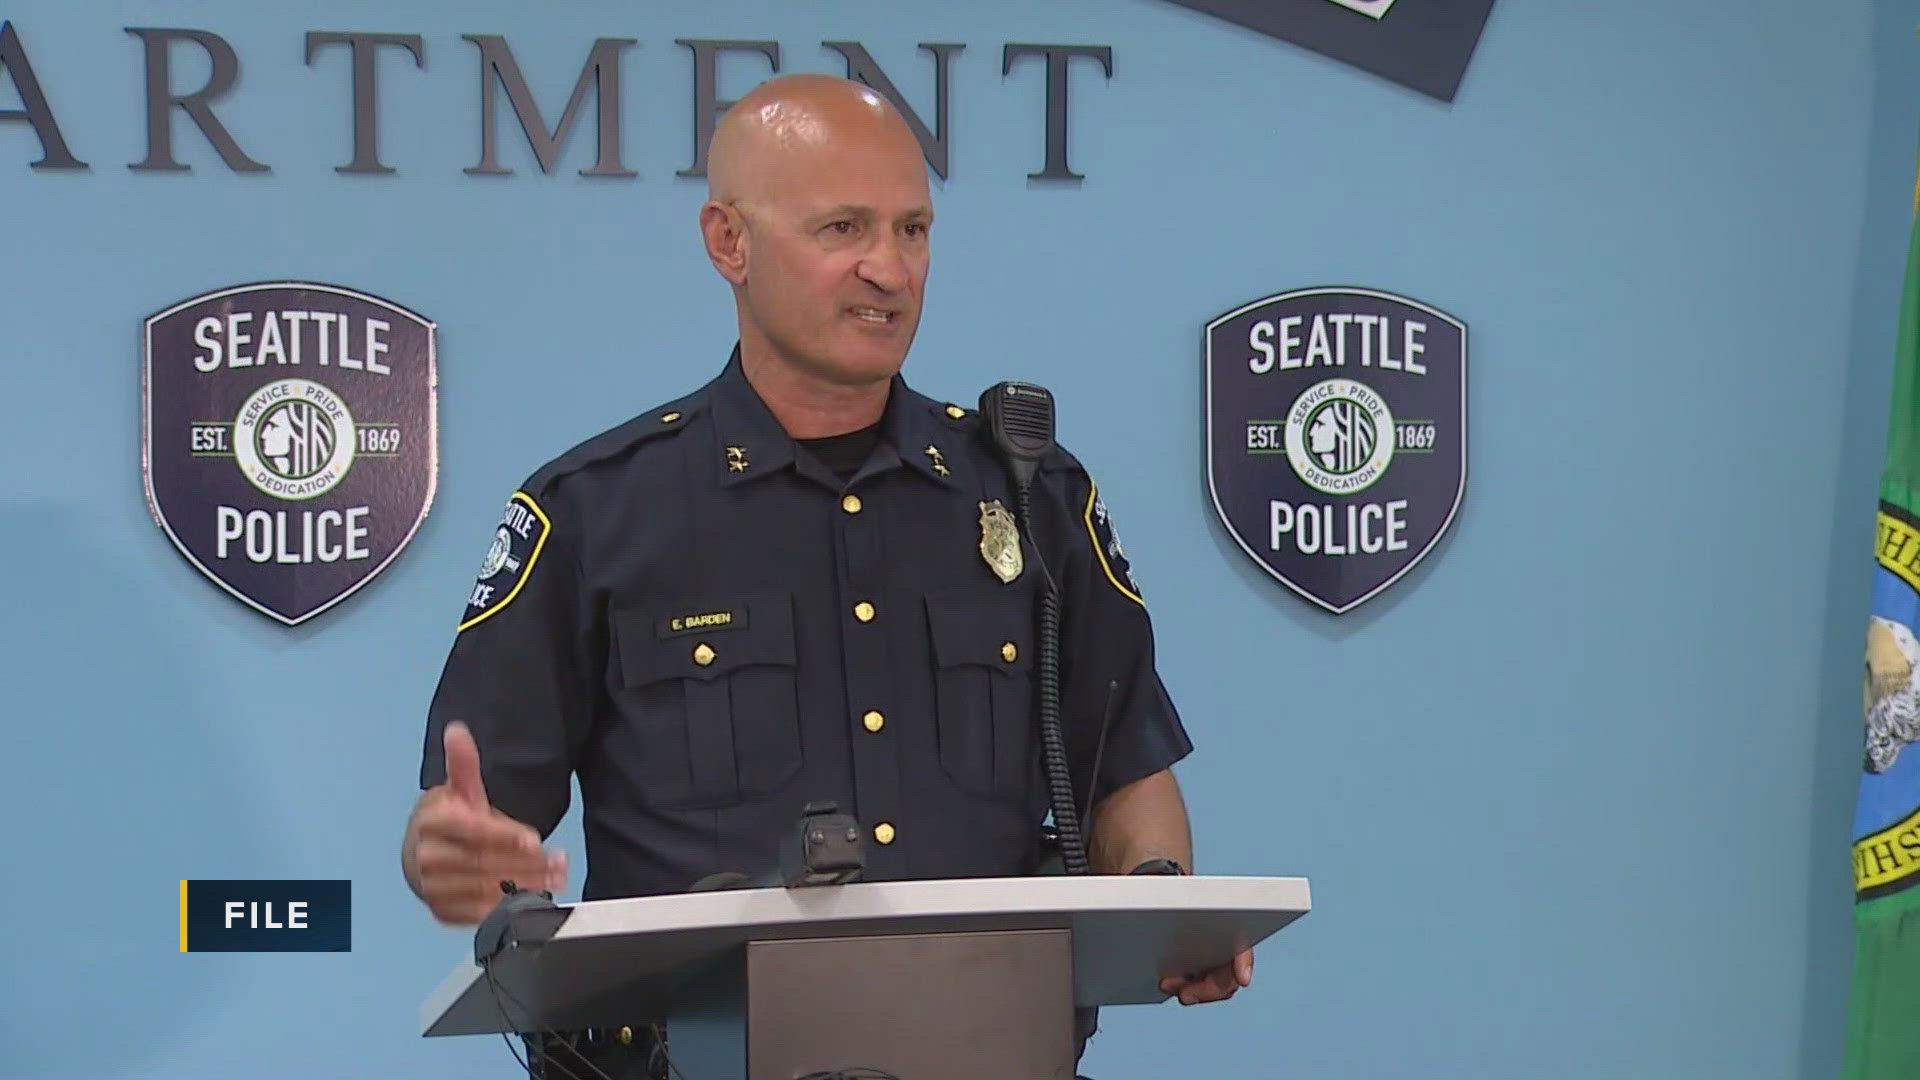 In addition to a criminal case, Seattle Deputy Chief Eric Barden is facing a serious accusation of alleged misconduct.